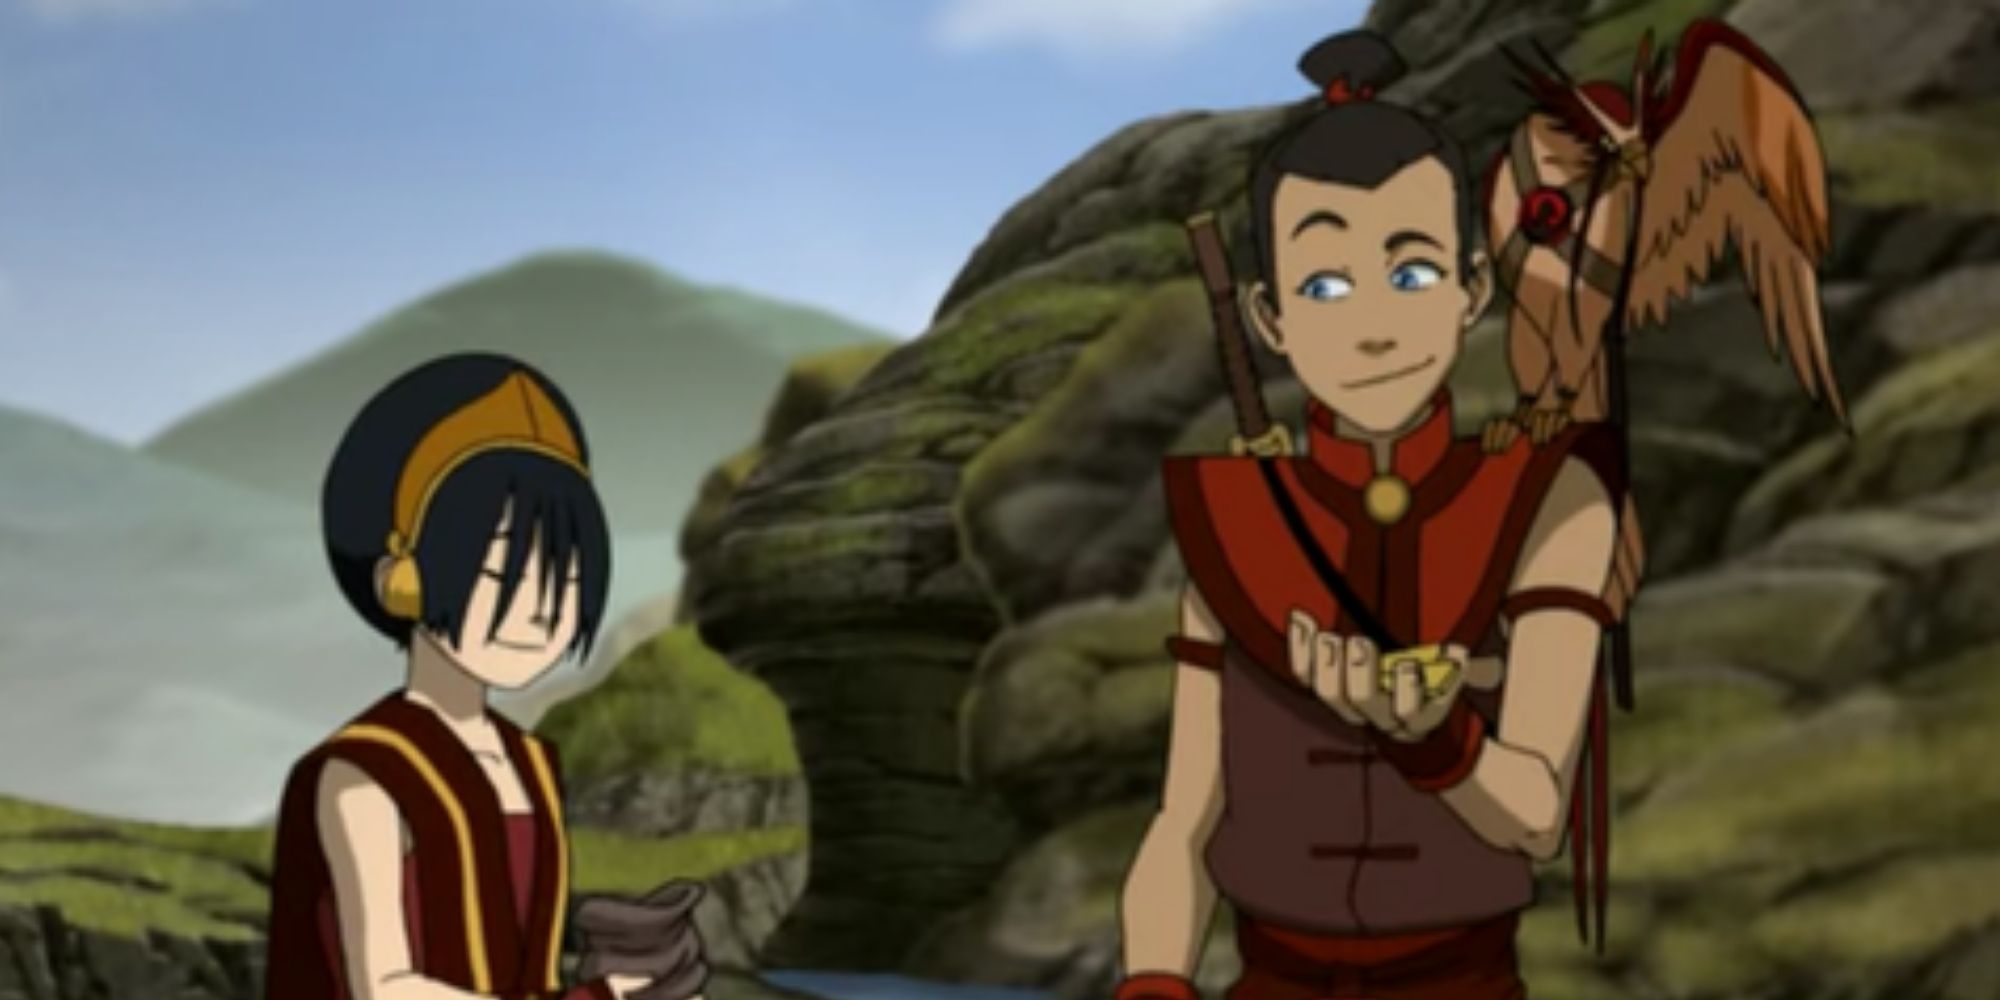 Toph and Sokka in Avatar: The Last Airbender.